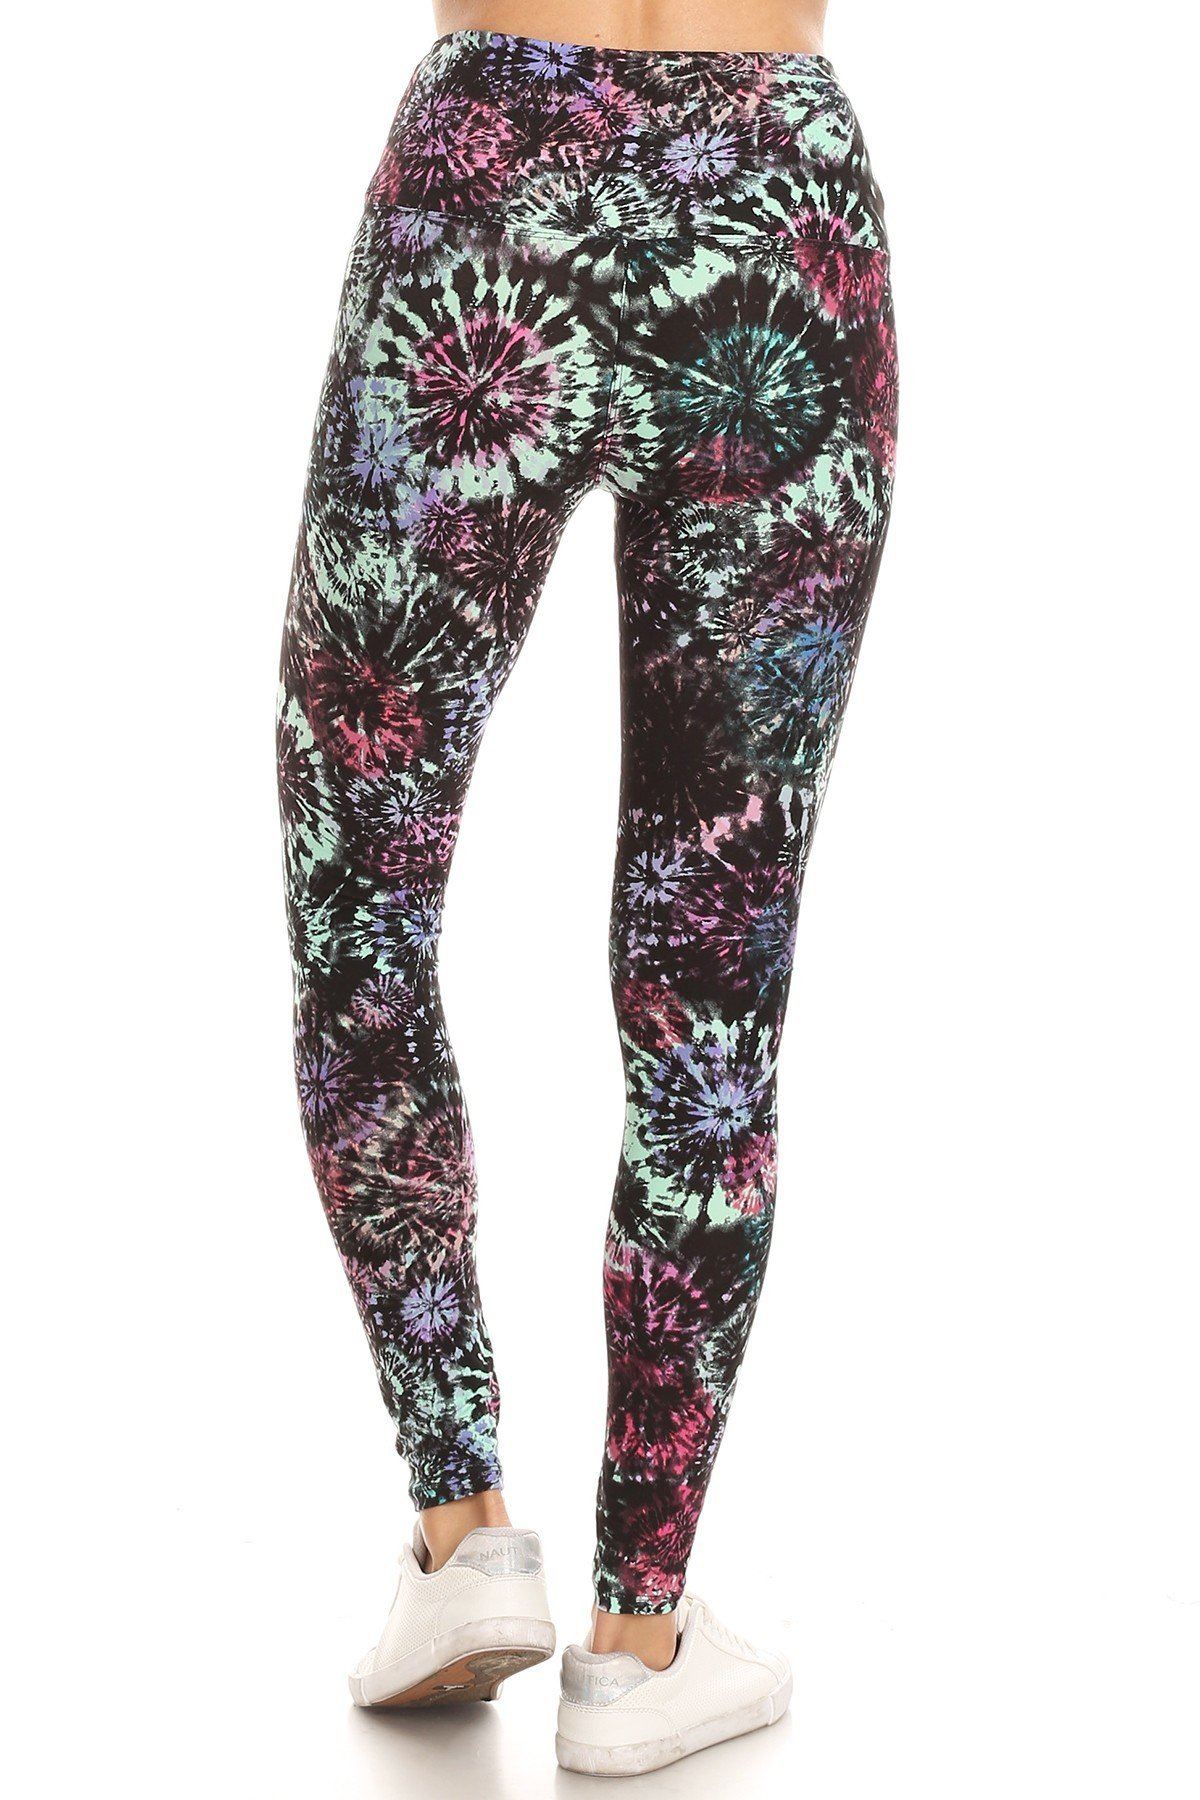 5-inch Long Yoga Style Banded Lined Tie Dye Printed Knit Legging With High Waist.